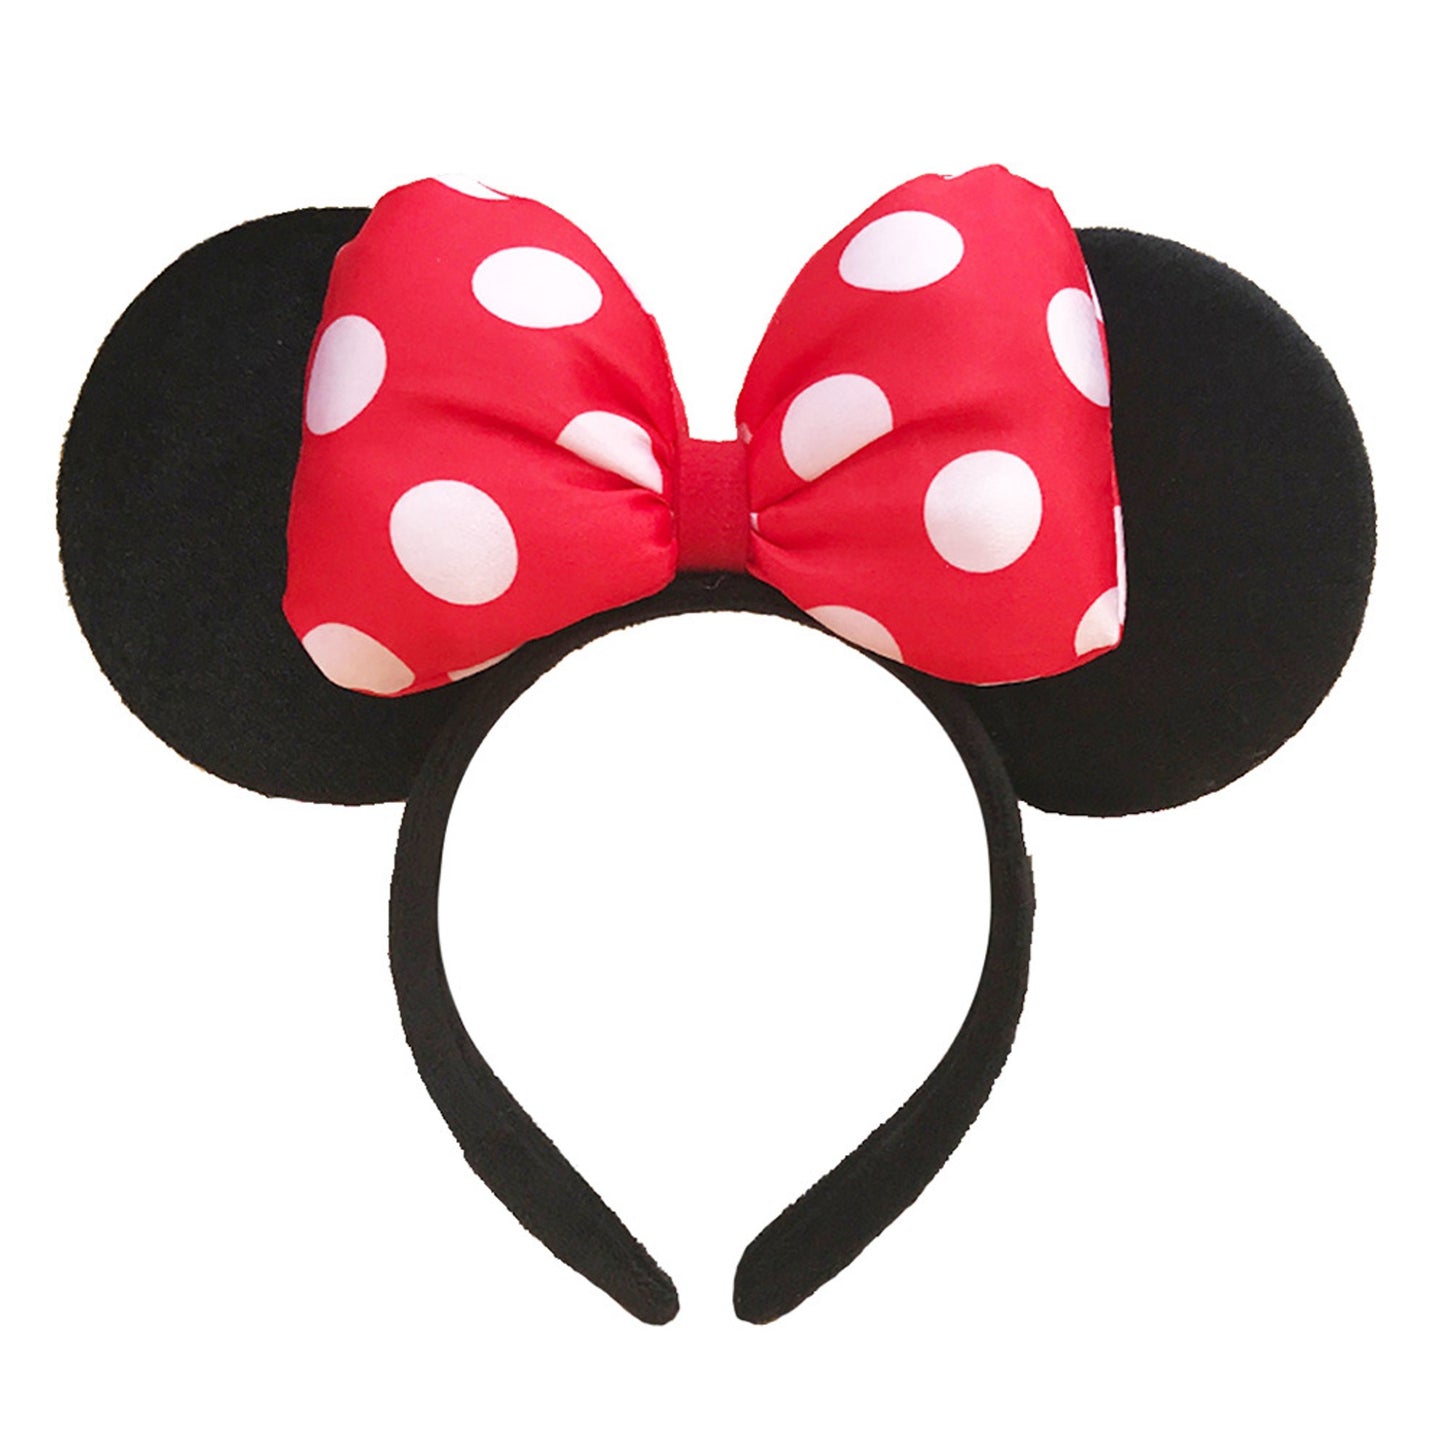 Accessories - Headband Mickey Mouse Fluffy